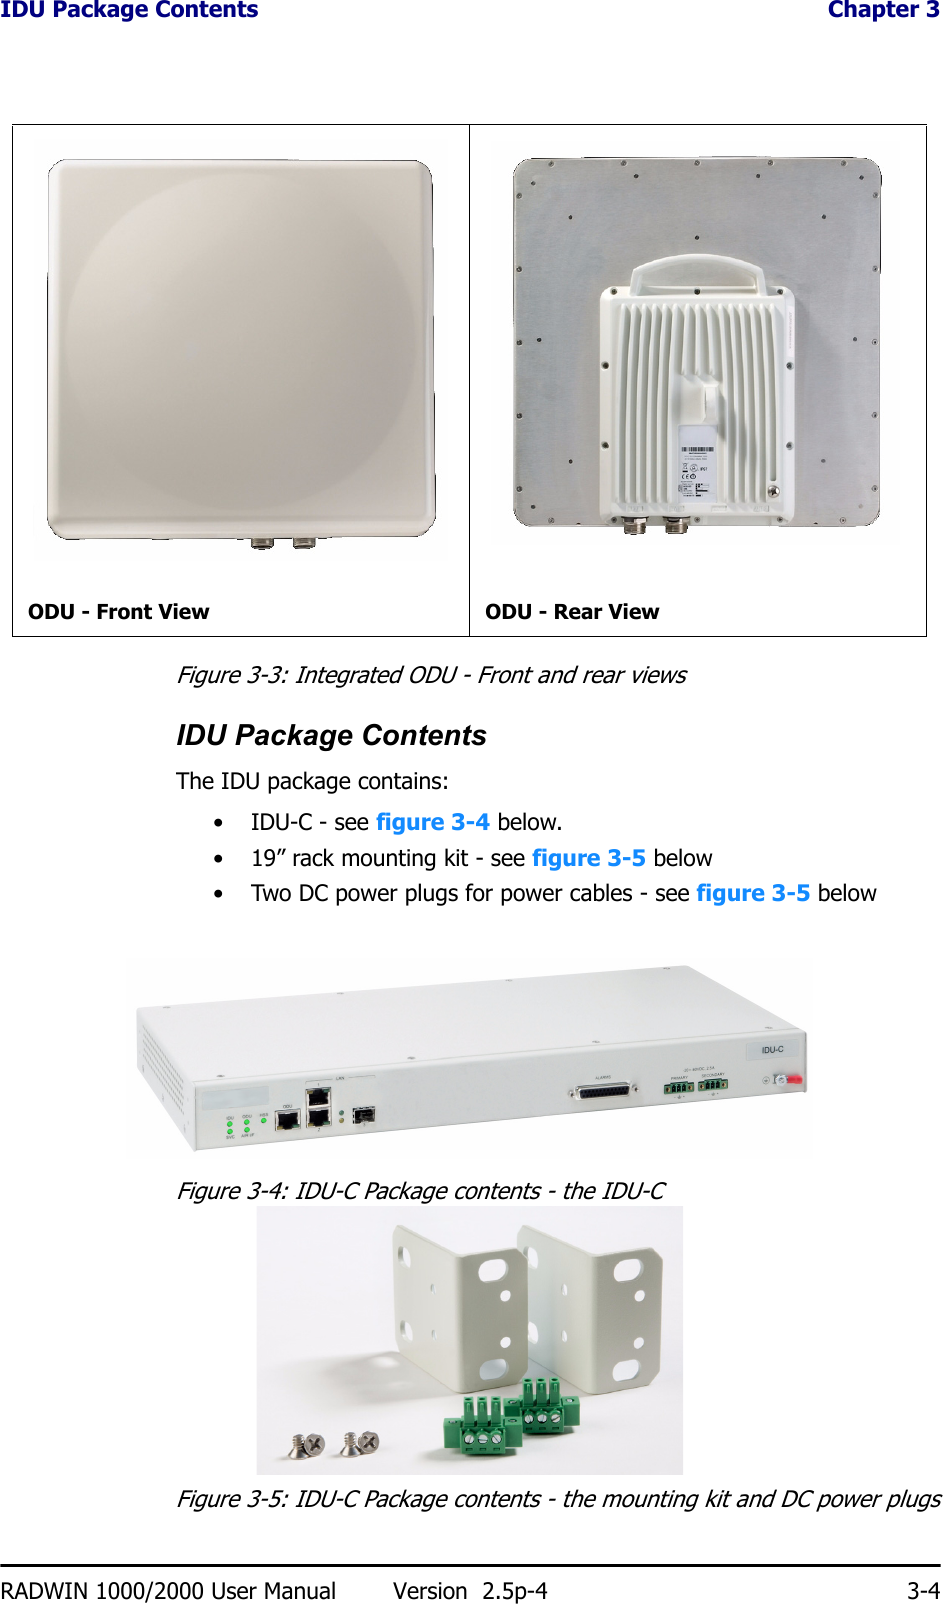 IDU Package Contents  Chapter 3RADWIN 1000/2000 User Manual Version  2.5p-4 3-4Figure 3-3: Integrated ODU - Front and rear viewsIDU Package ContentsThe IDU package contains:• IDU-C - see figure 3-4 below.• 19” rack mounting kit - see figure 3-5 below• Two DC power plugs for power cables - see figure 3-5 belowFigure 3-4: IDU-C Package contents - the IDU-CFigure 3-5: IDU-C Package contents - the mounting kit and DC power plugsODU - Front View ODU - Rear View